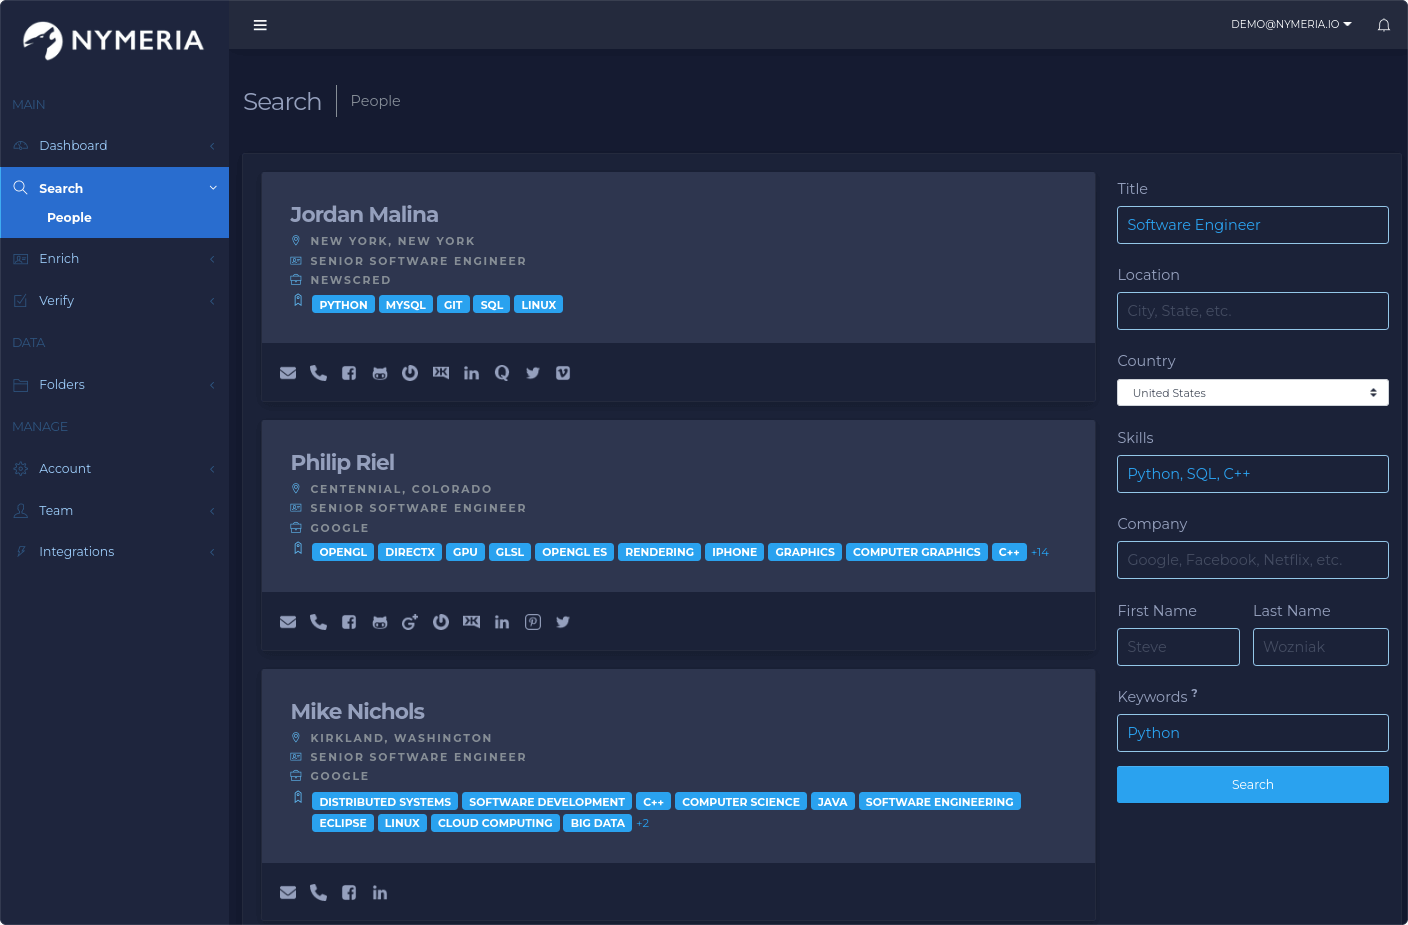 Nymeria search interface showcasing profiles of software engineers with skill tags